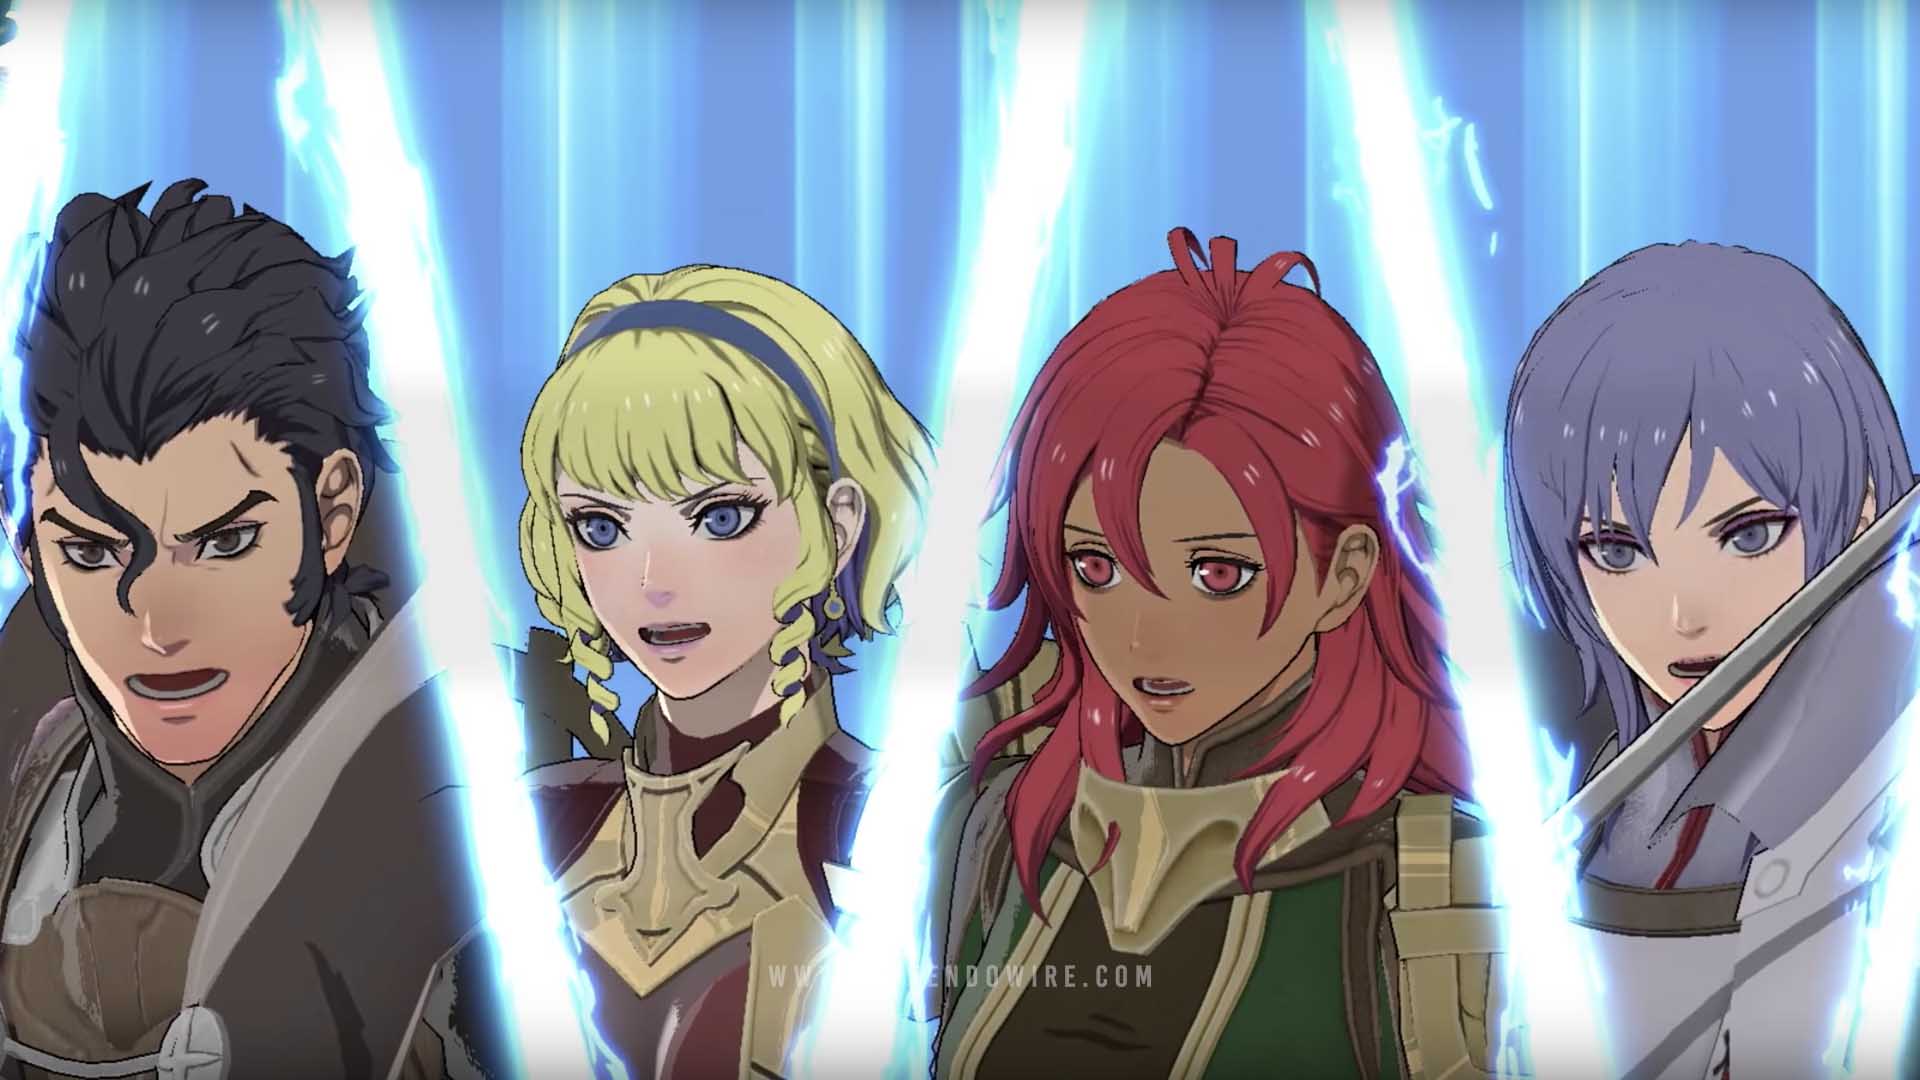 Fire Emblem Three Houses Constance S Support New Fire Emblem Three Houses Cindered Shadows Details Share Its Place In The Story Difficulty Higher Nintendo Wire